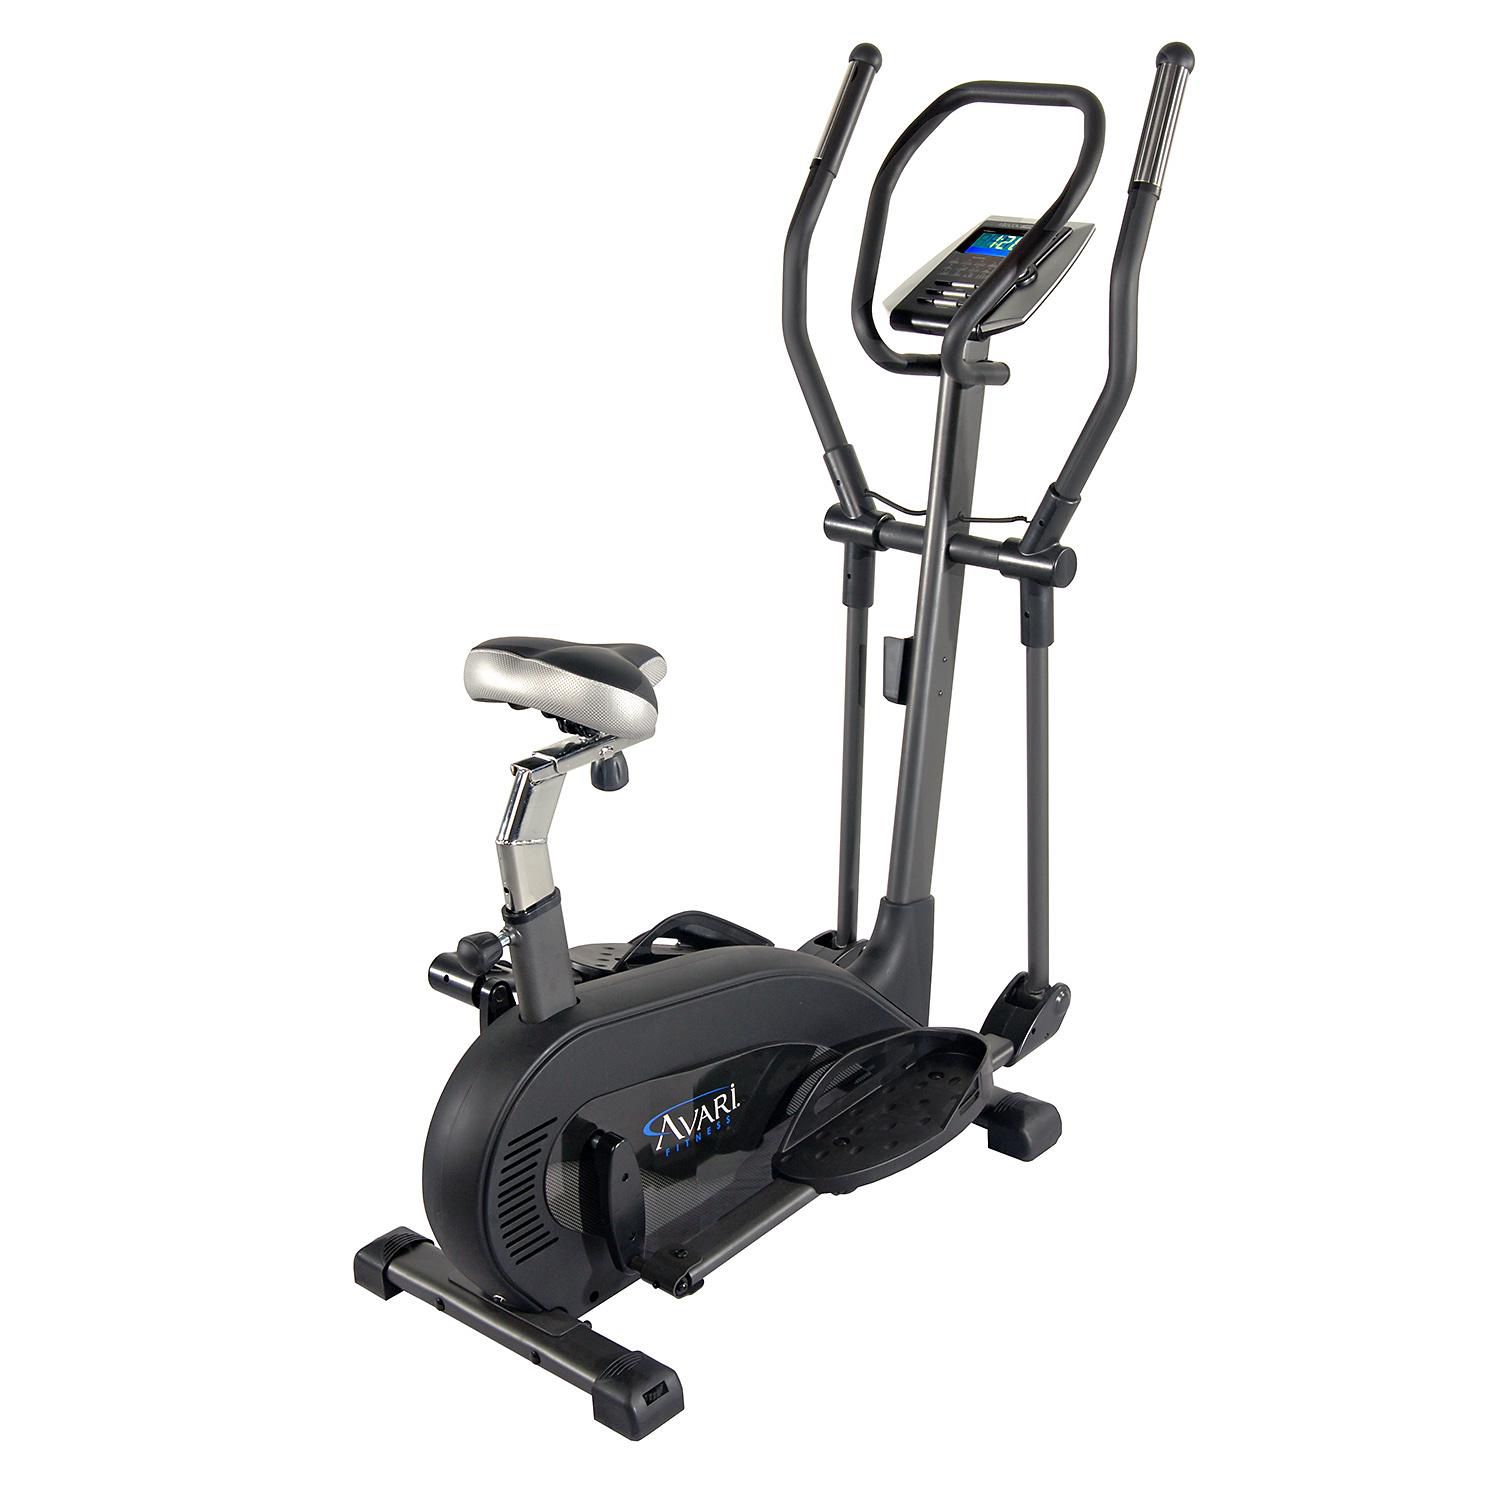 Avari Magnetic Elliptical with Adjustable Seat A550-175 2-in-1 workout